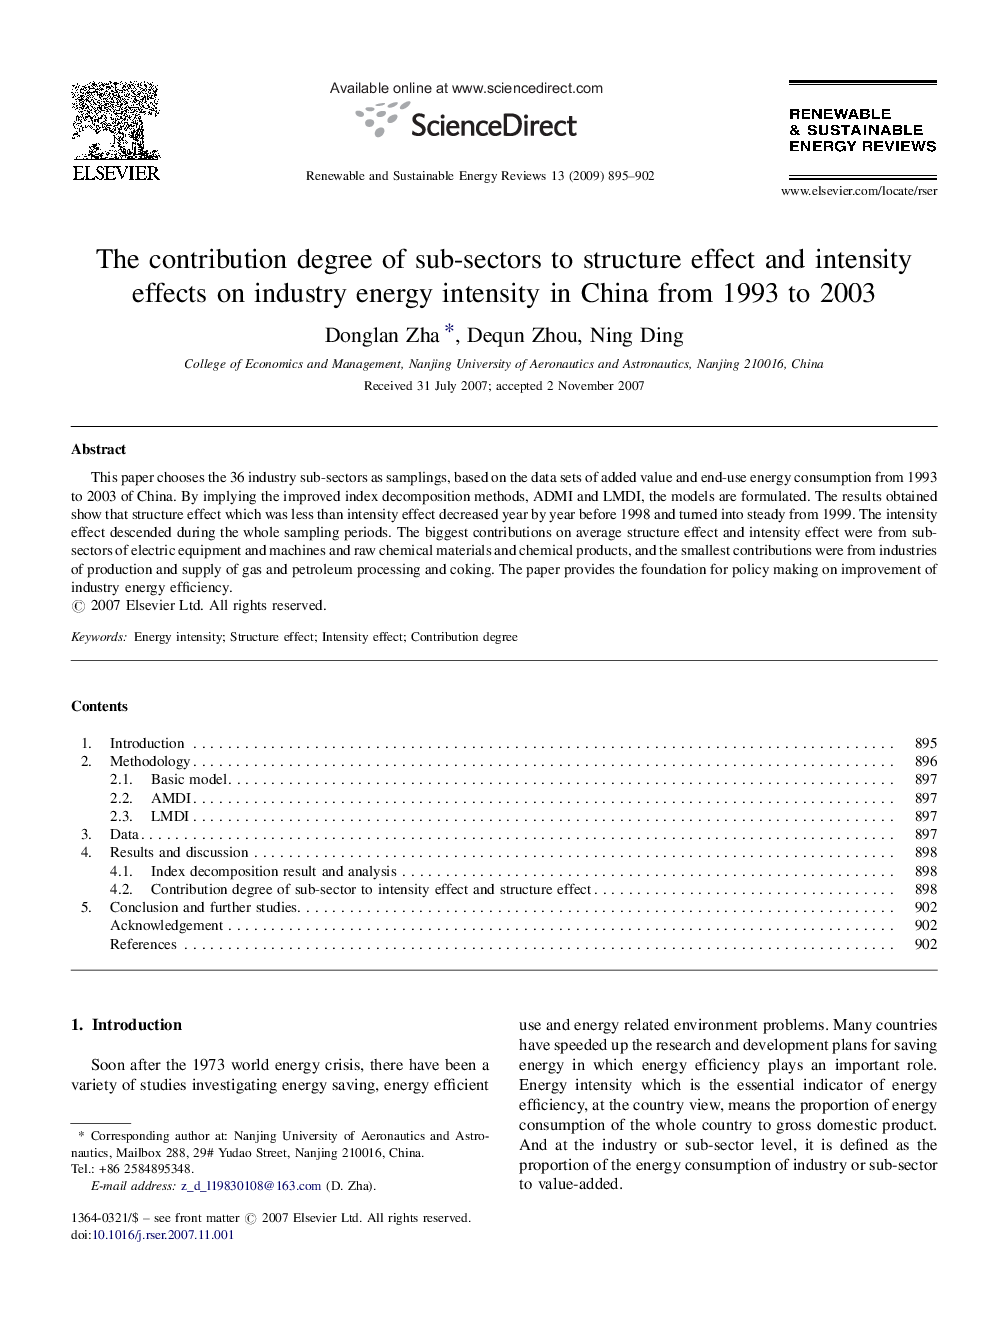 The contribution degree of sub-sectors to structure effect and intensity effects on industry energy intensity in China from 1993 to 2003